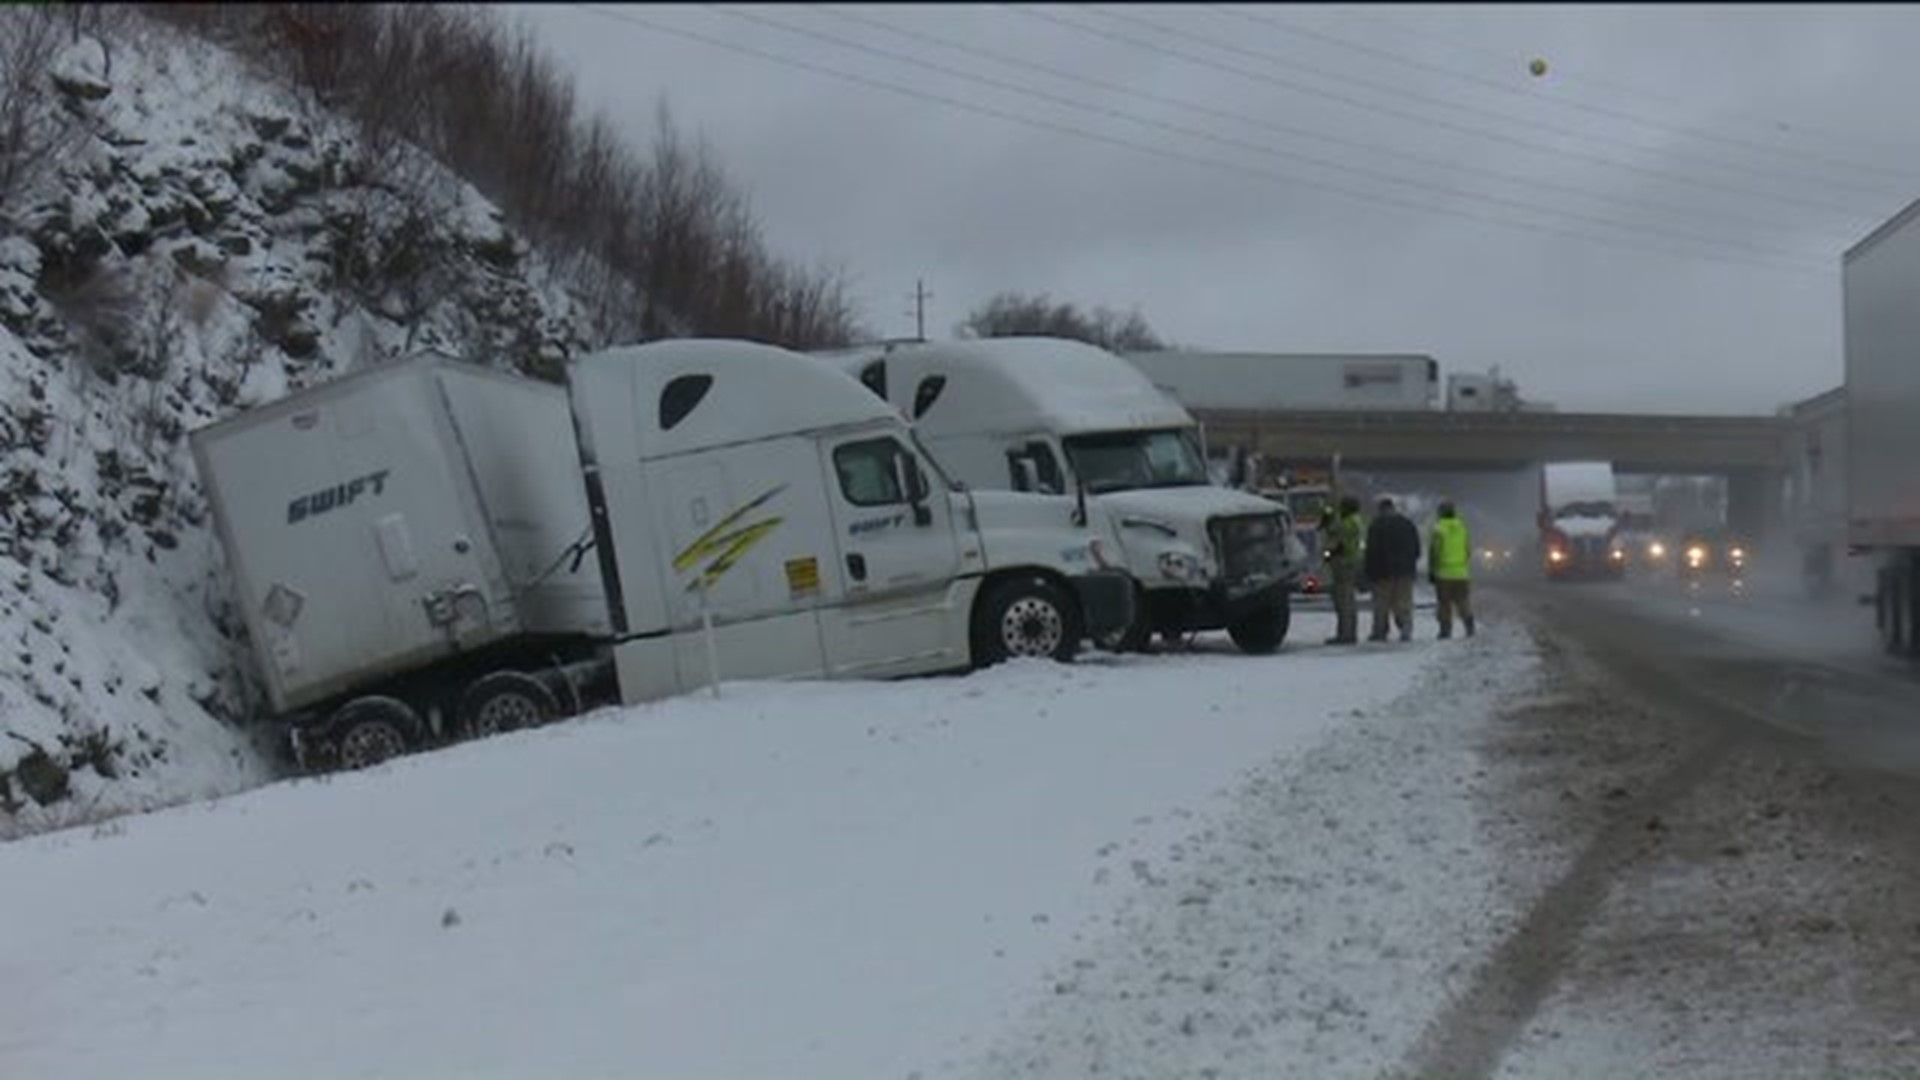 Icy Roads Cause Problems for Two Big Rigs on the Interestate